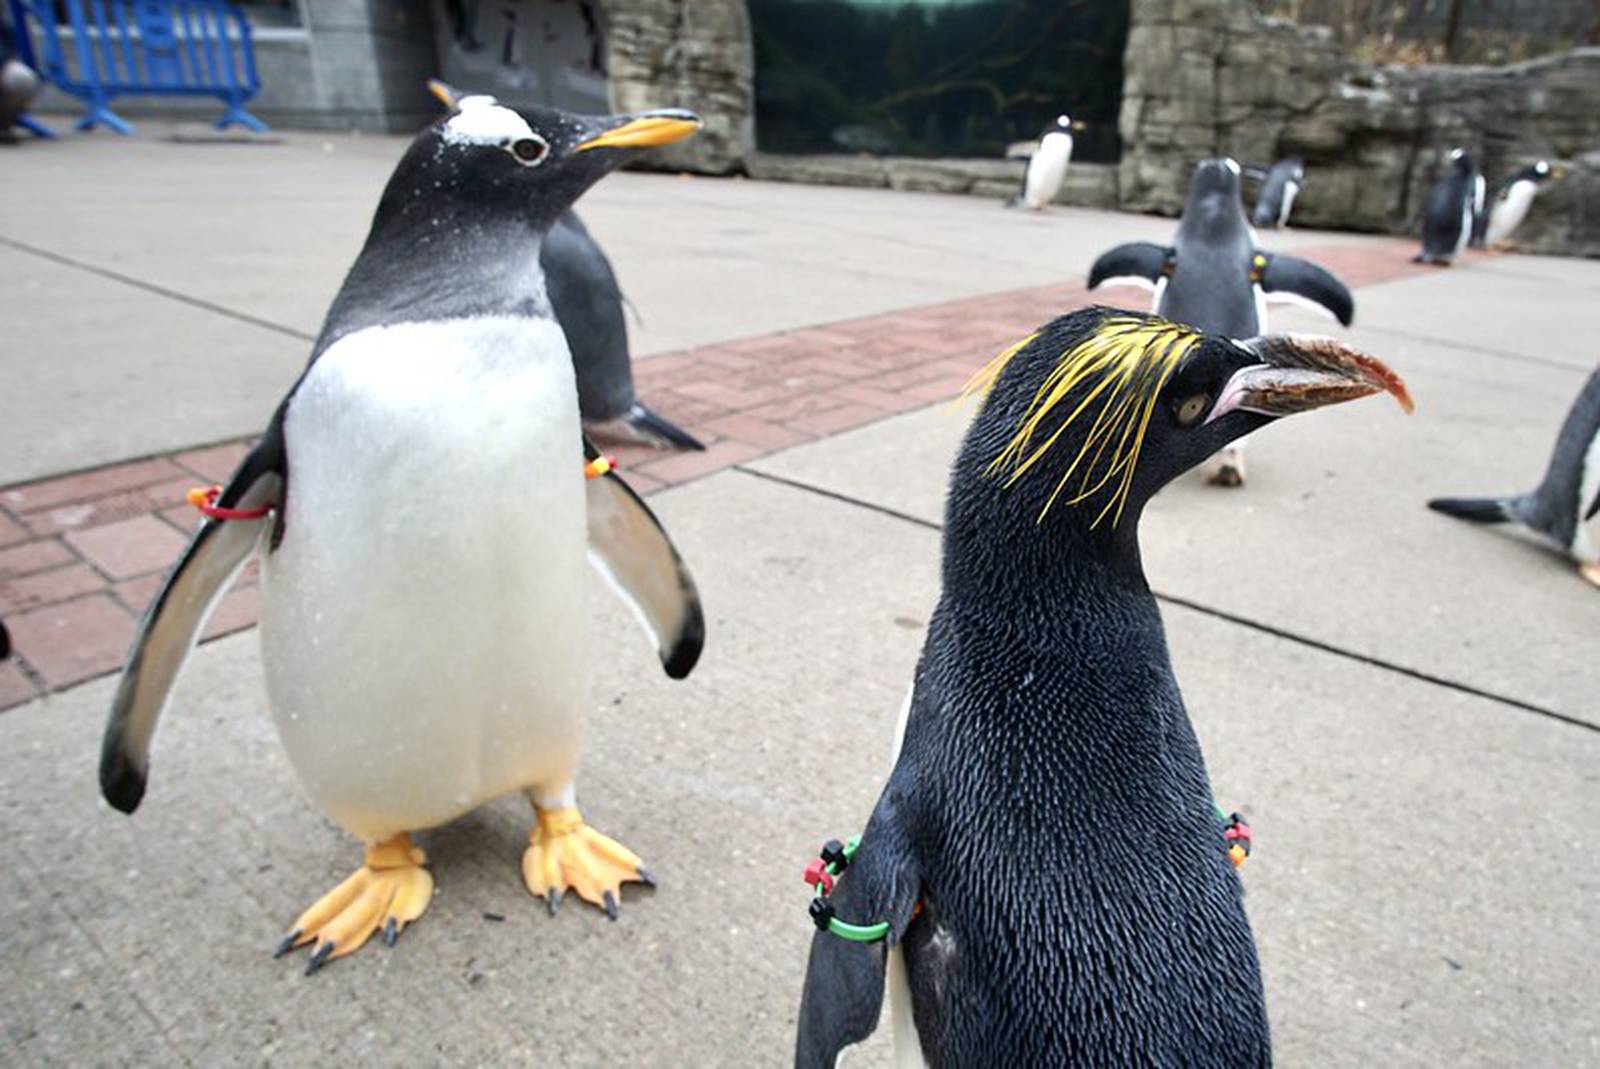 PHOTOS: Annual Penguins on Parade tradition kicks off at Pittsburgh Zoo